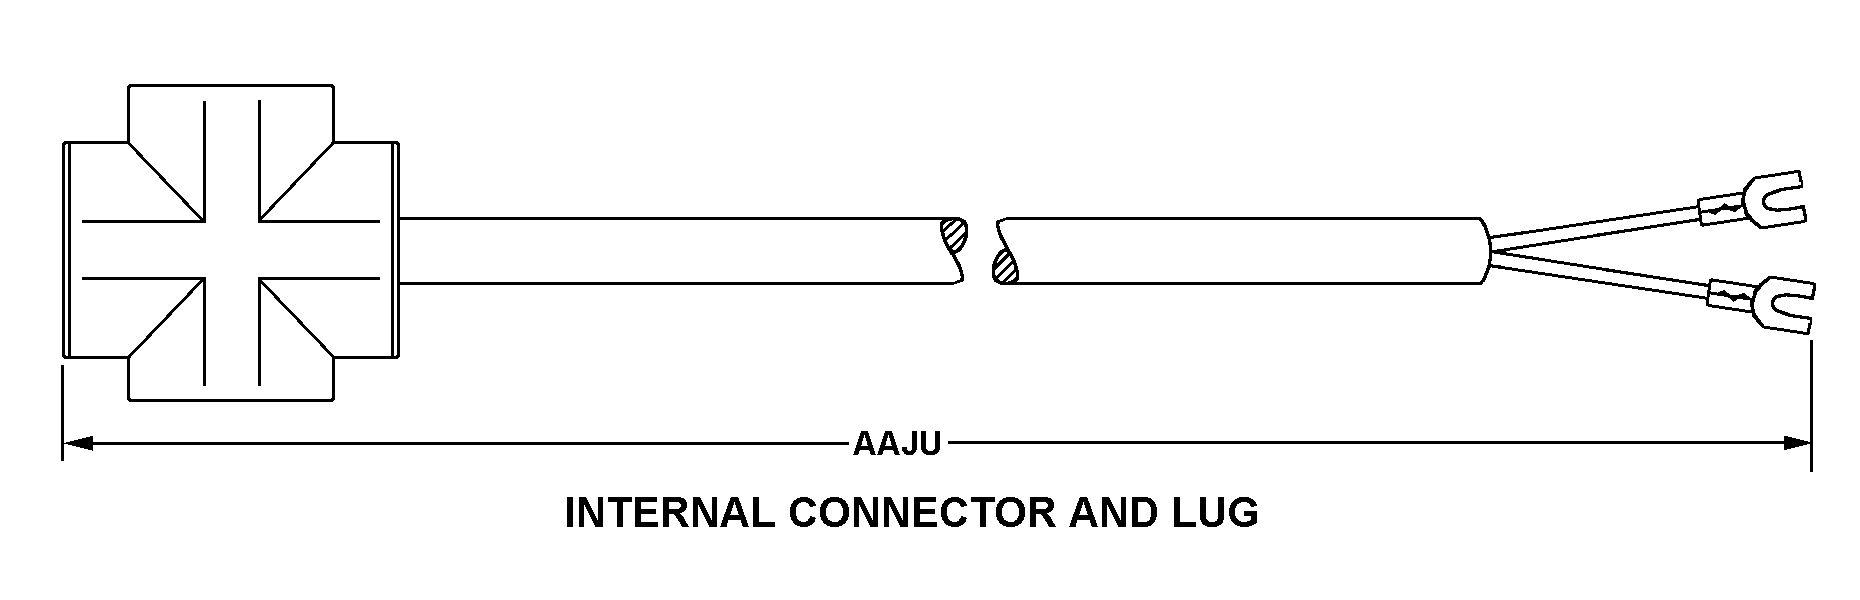 INTERNAL CONNECTOR AND LUG style nsn 5995-01-027-3320